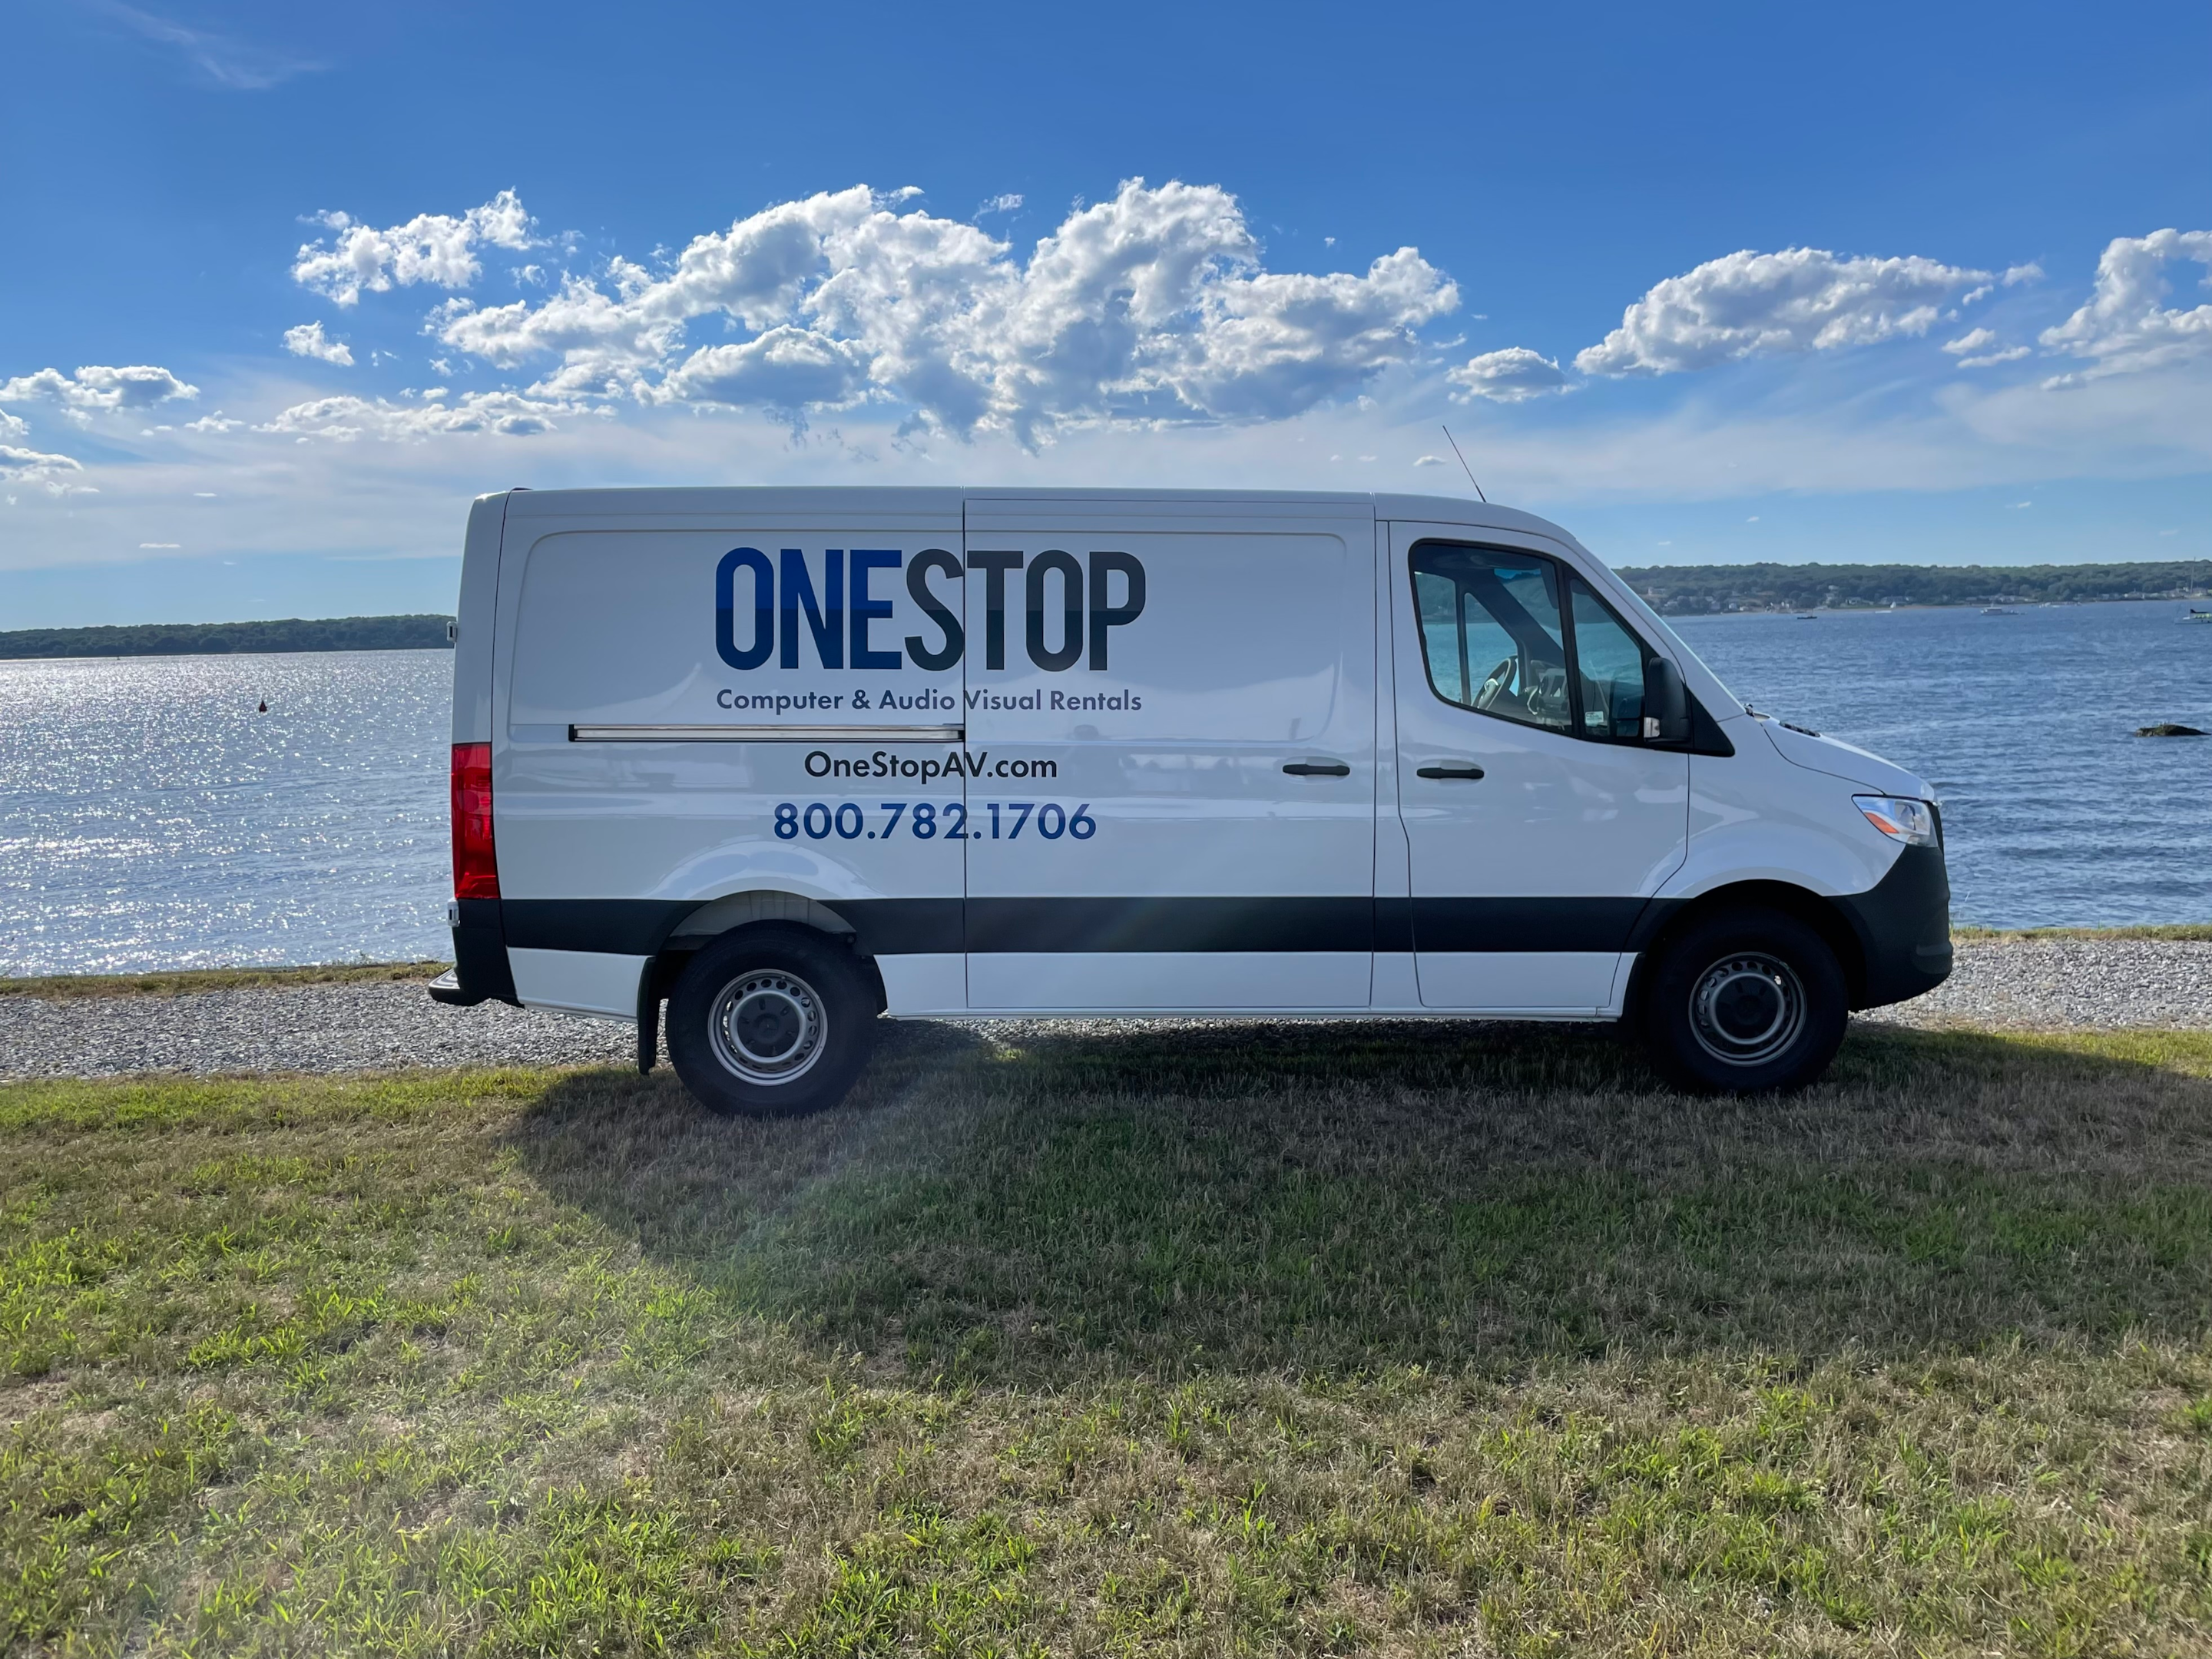 OneStop can assist with setup and breakdown in participating locations